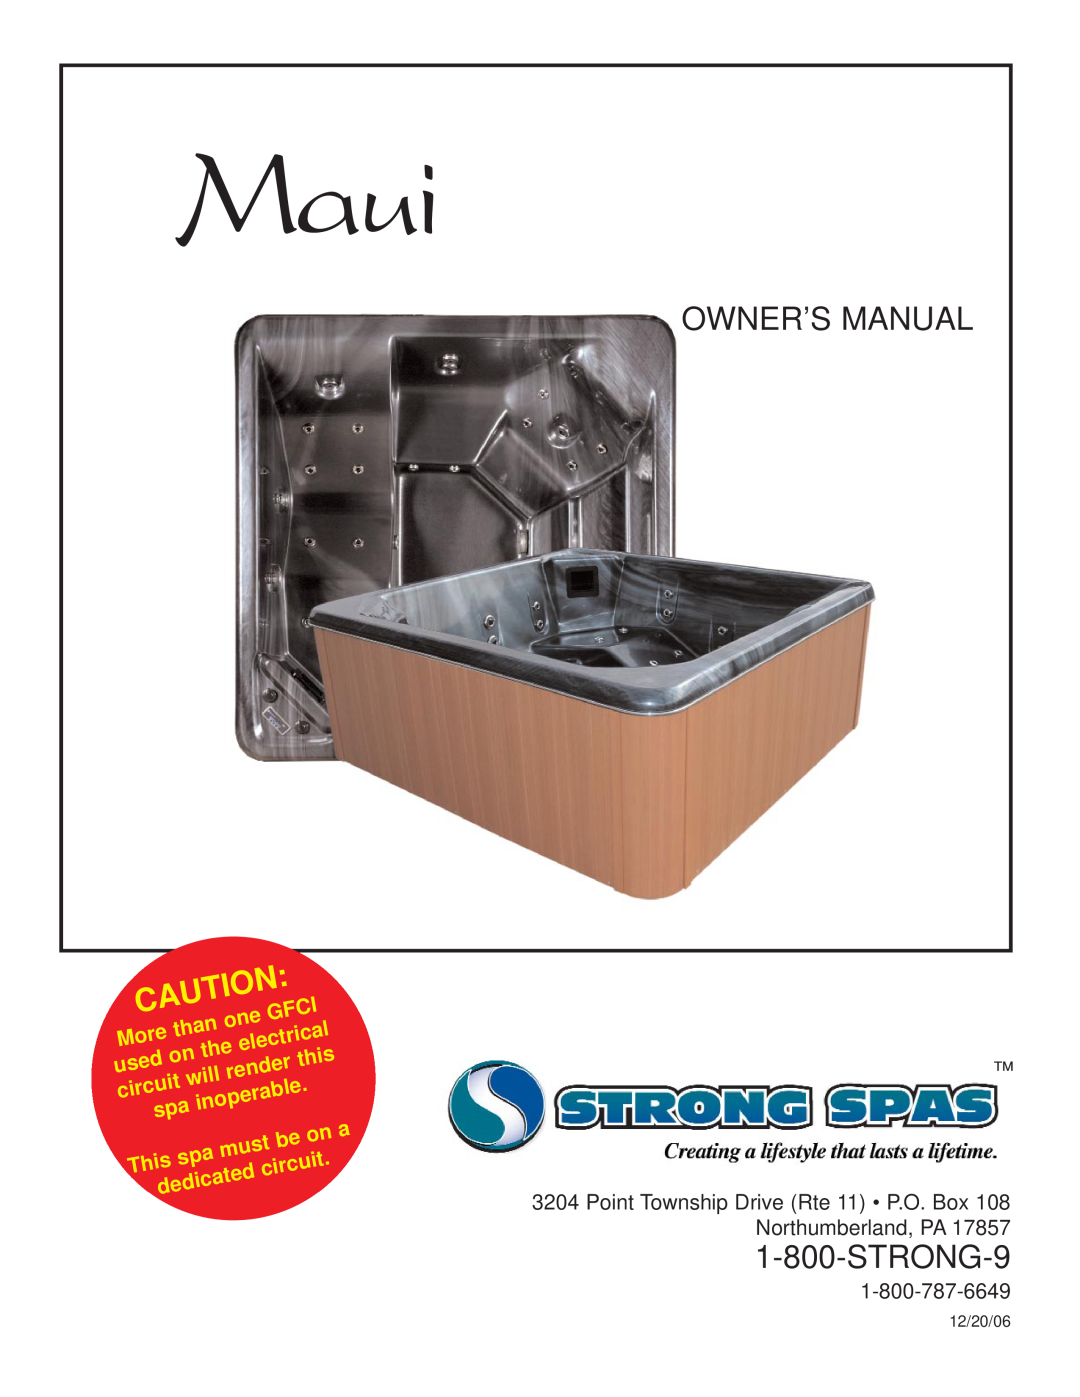 Strong Pools and Spas Maui Spa owner manual STRONG-9, than, Gfci, More, electrical, used, this, render, will, circuit 